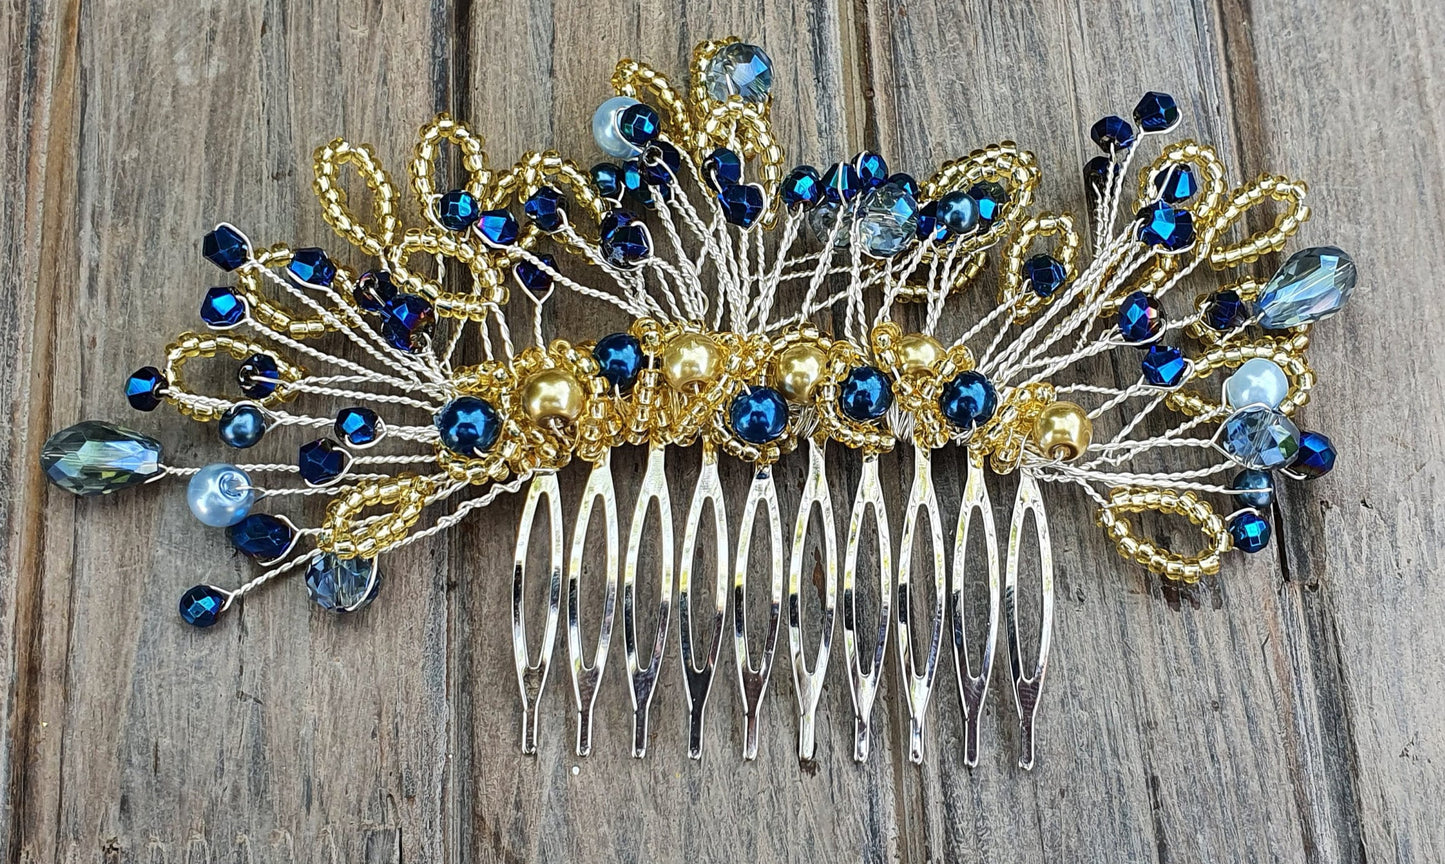 Handmade bridal comb with blue pearls and drop stones - elegant hair accessory for weddings and parties, silver-colored metal comb